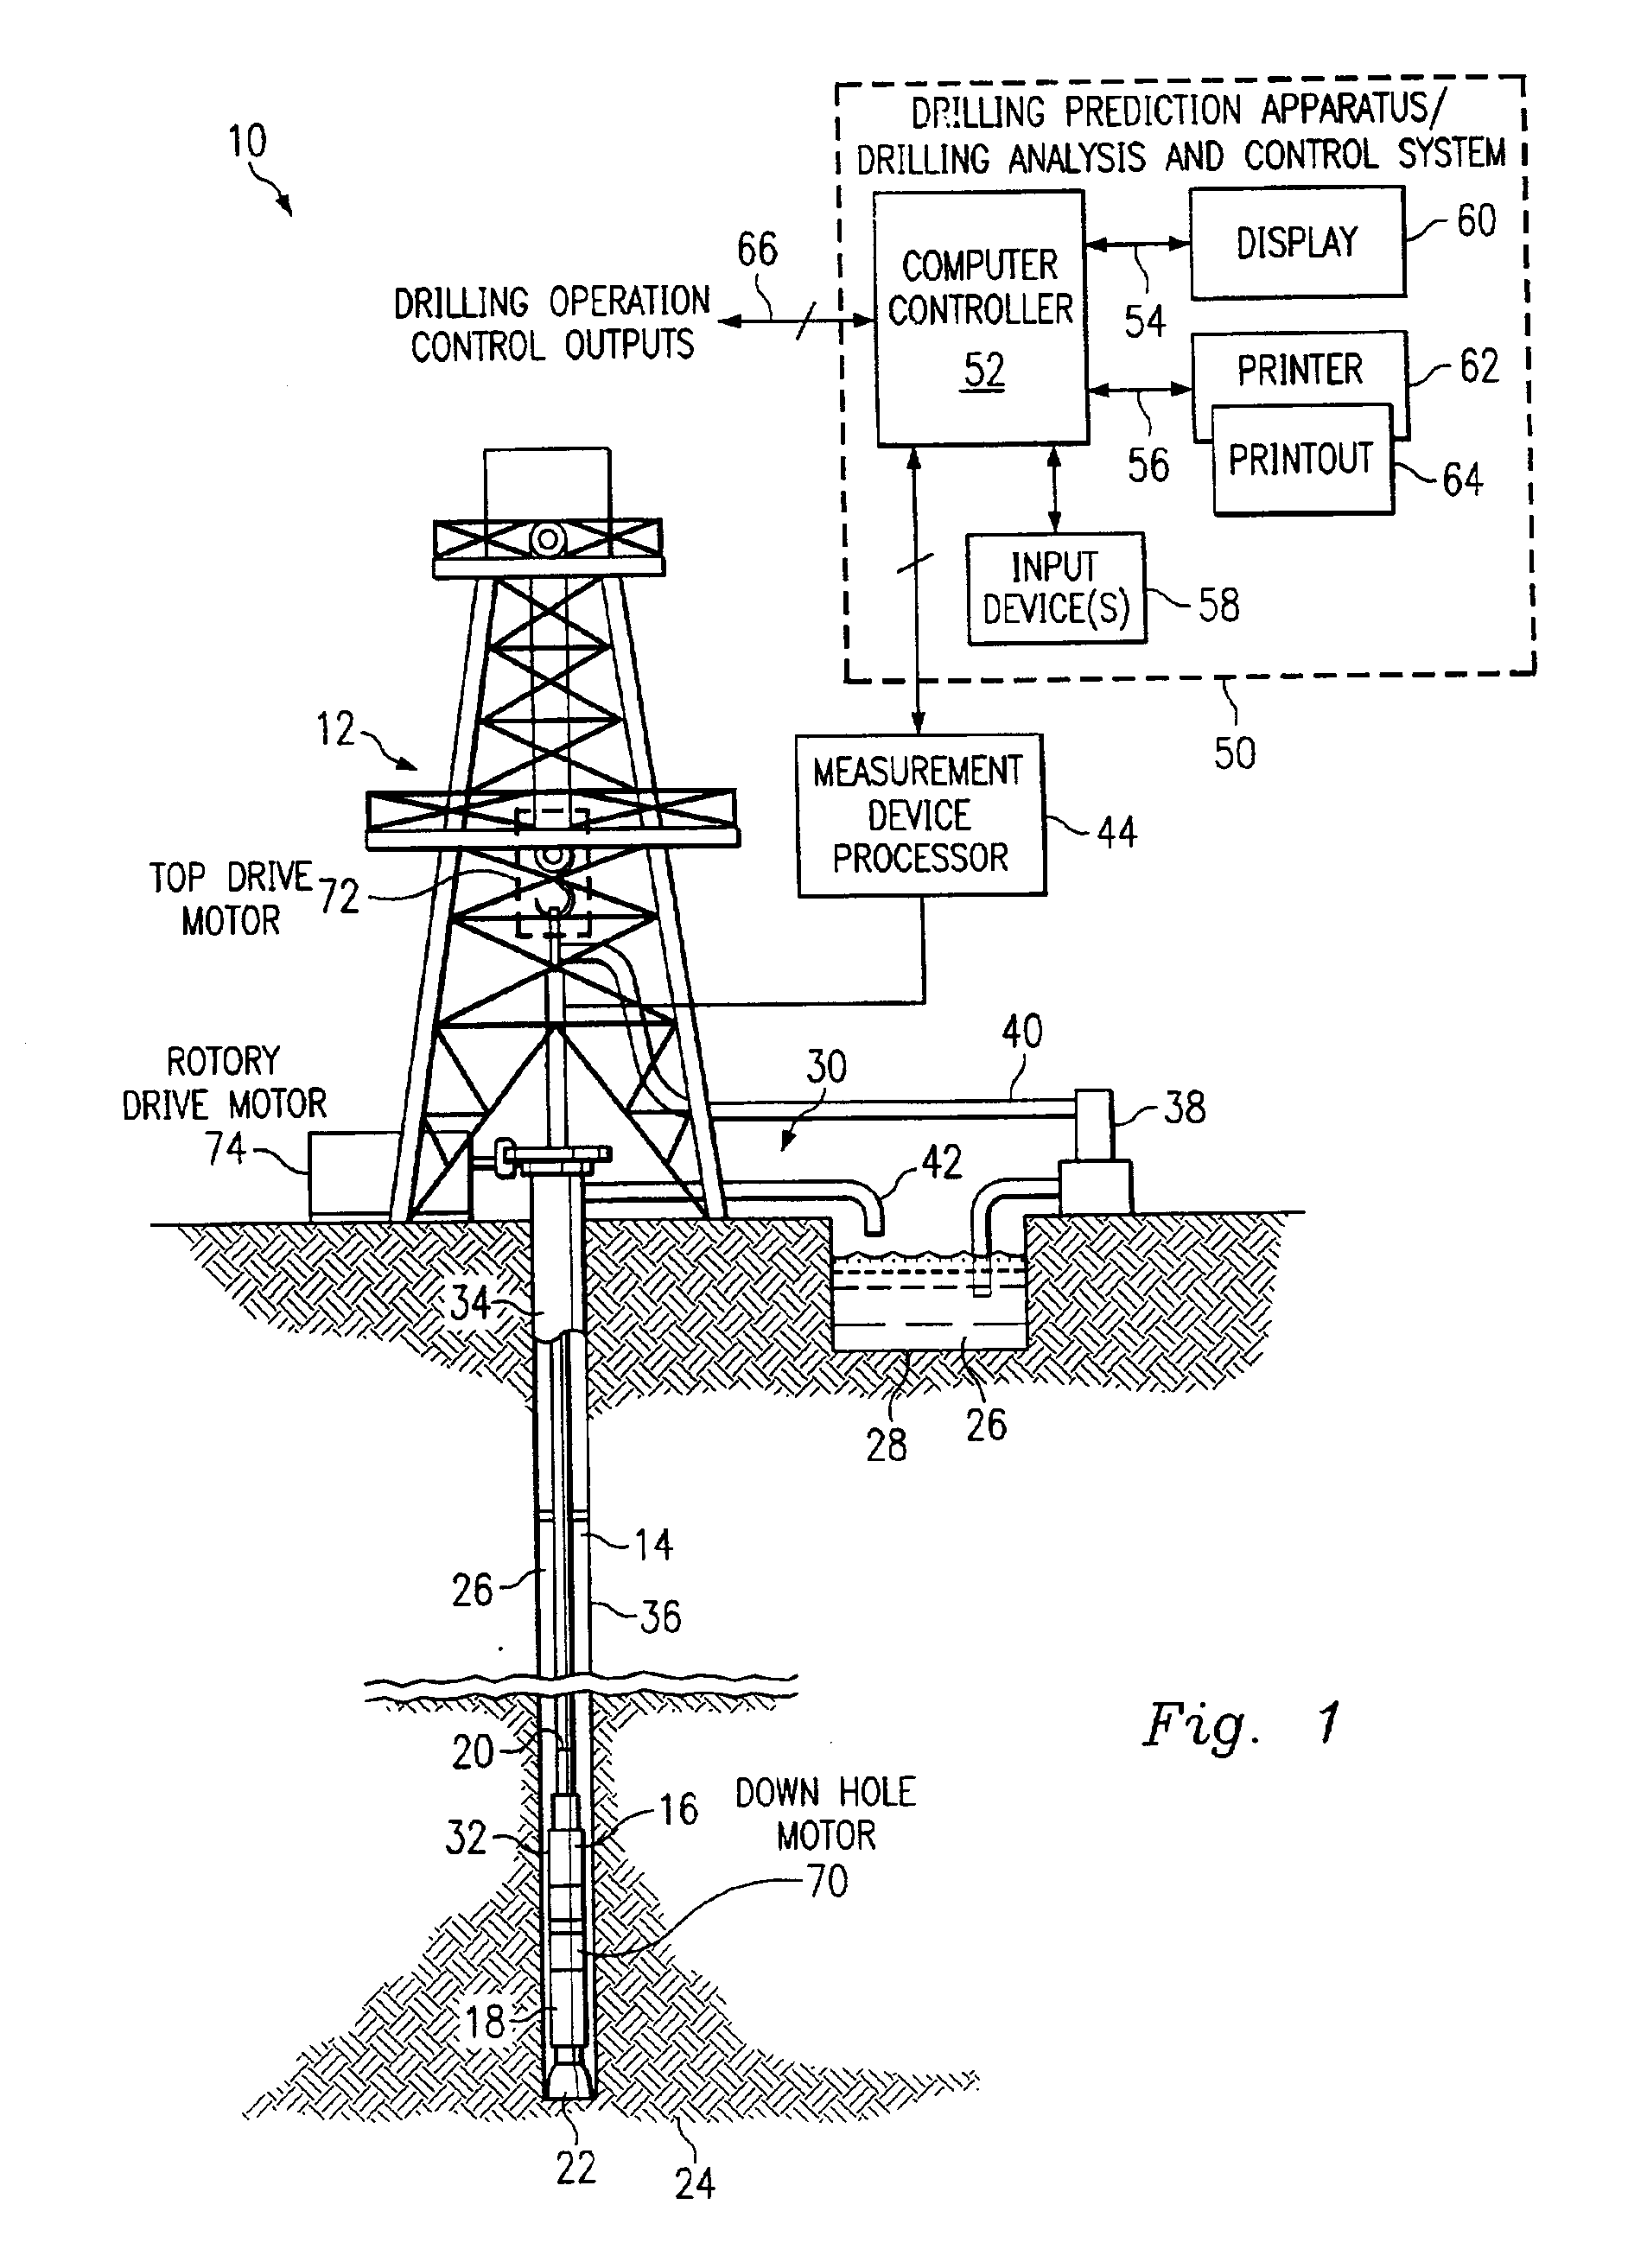 Method and system for predicting performance of a drilling system of a given formation